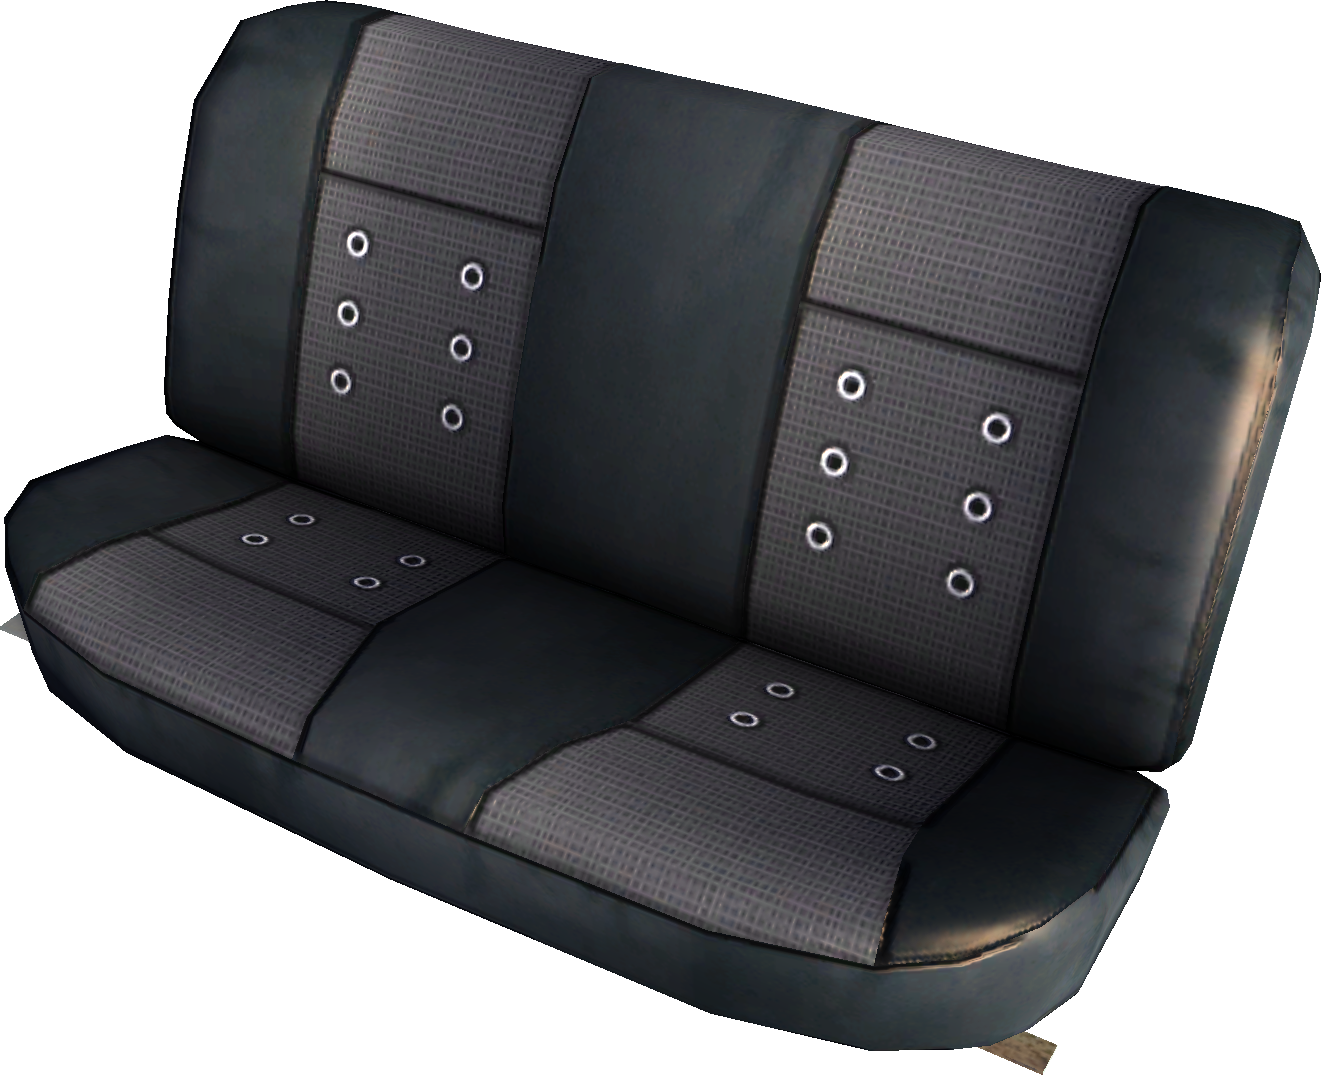 https://static.wikia.nocookie.net/my-summer-car/images/e/e6/Seat_rear.png/revision/latest?cb=20180318200102